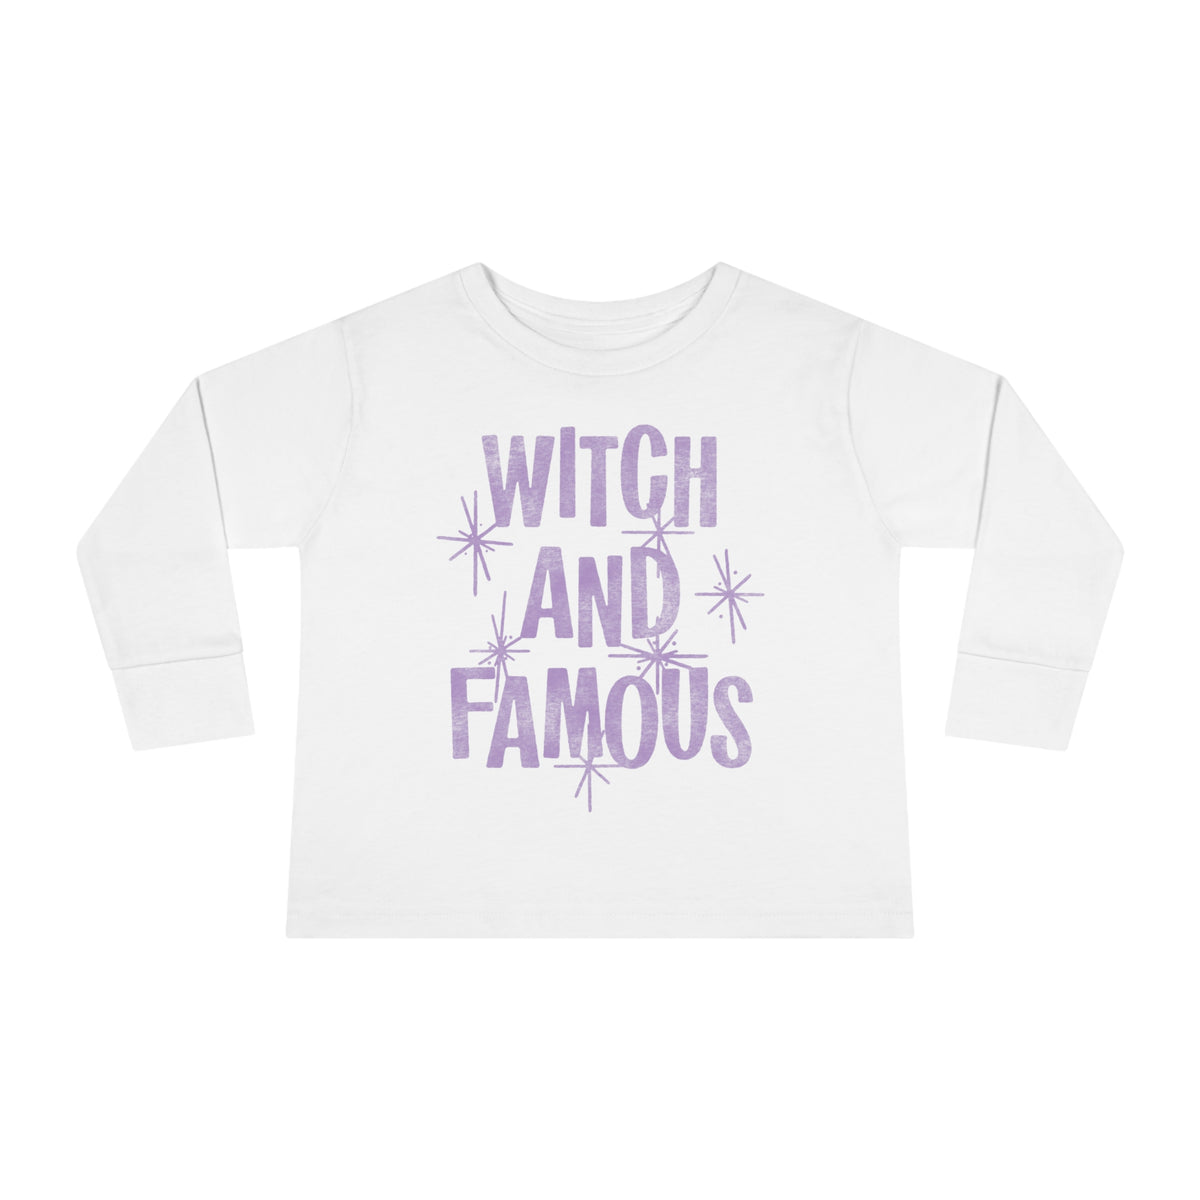 Witch and Famous Rabbit Skins Toddler Long Sleeve Tee